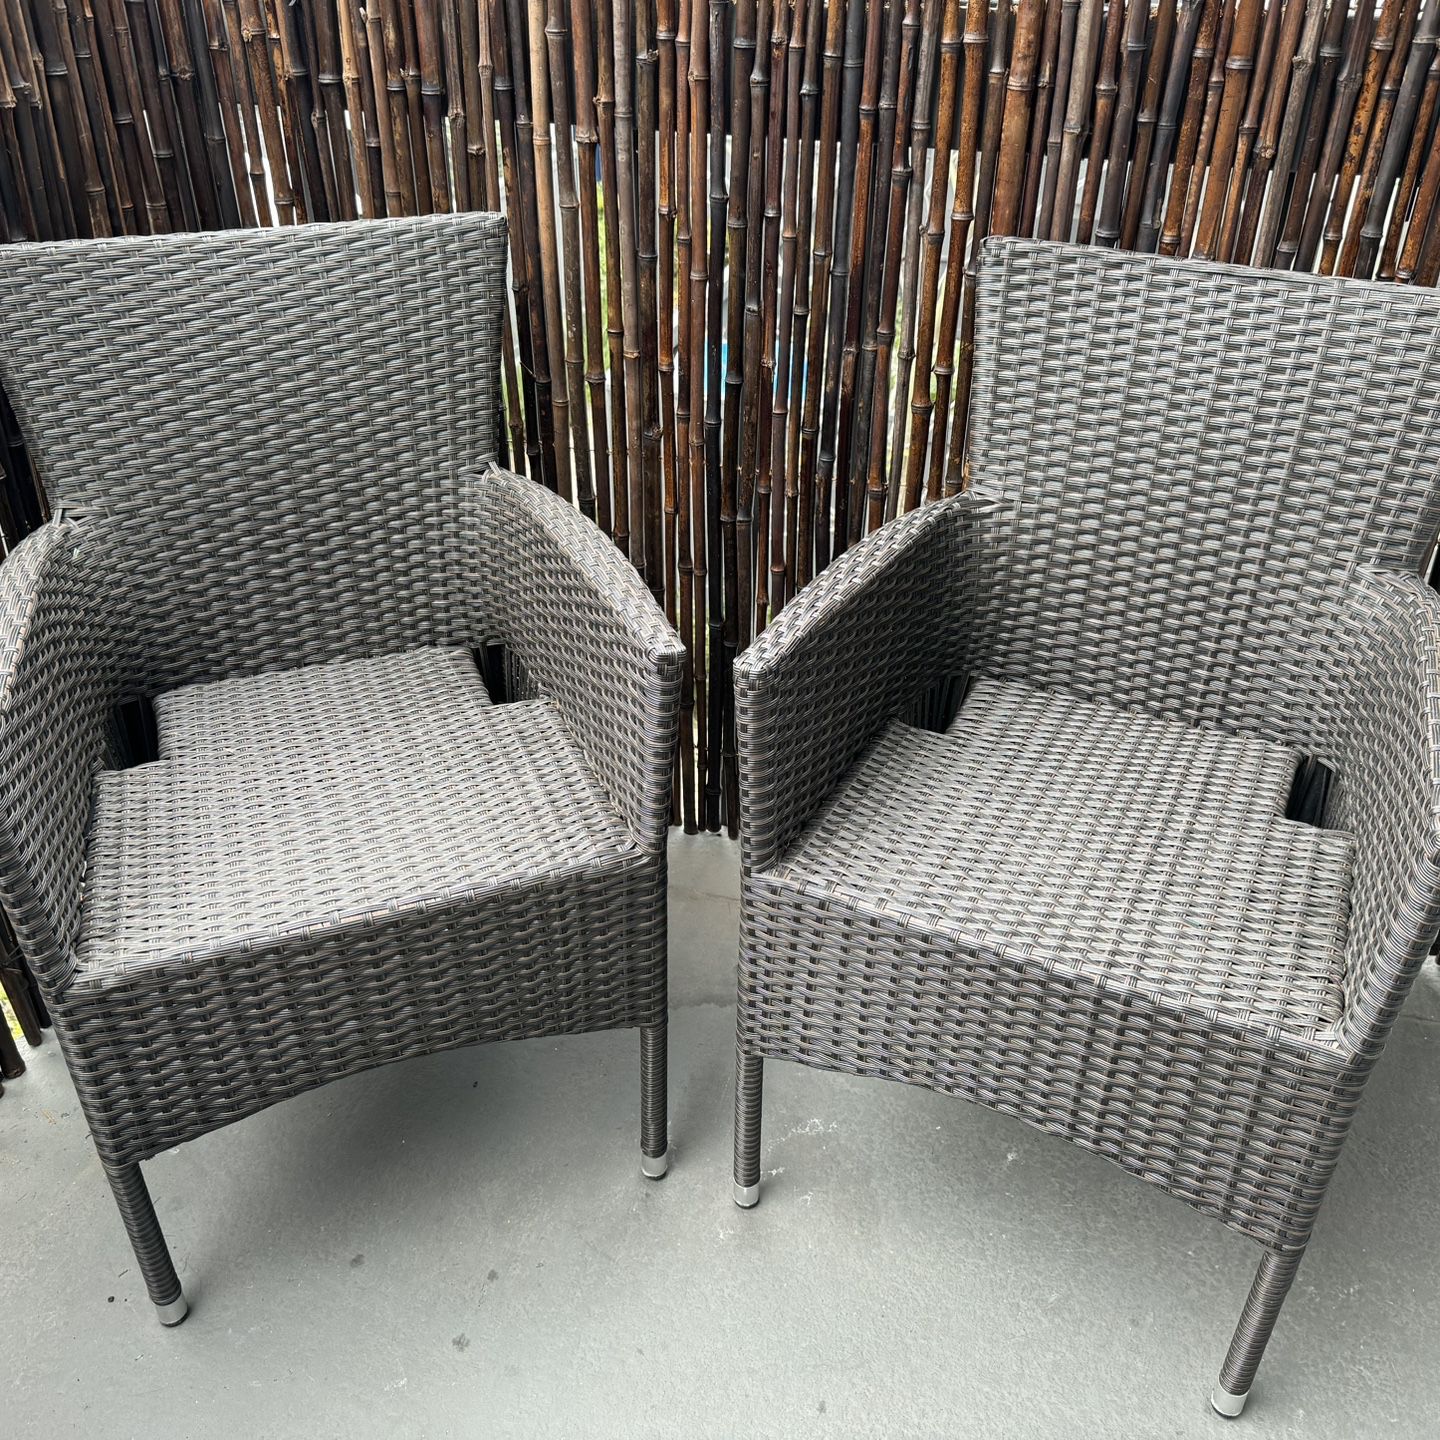 $50 - Set Of 2 Nautica Outdoor Chairs 